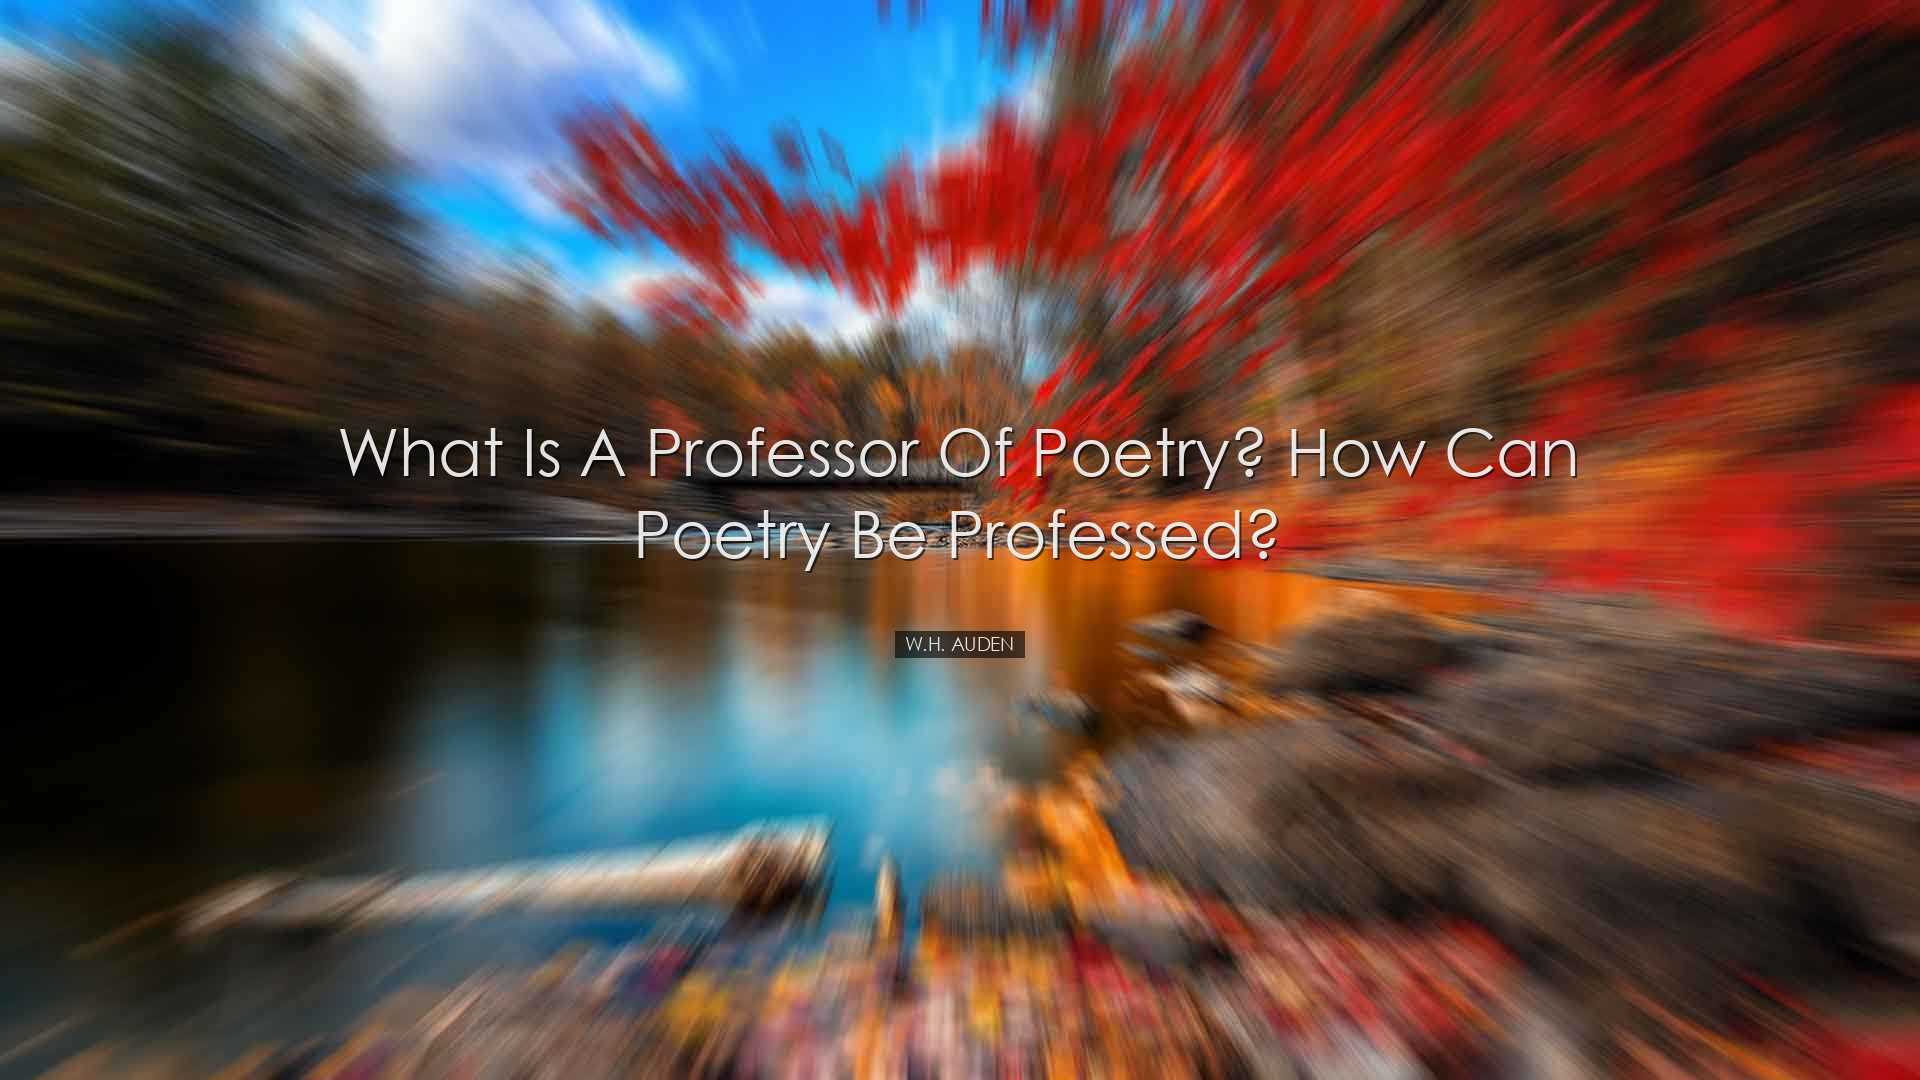 What is a Professor of Poetry? How can poetry be professed? - W.H.